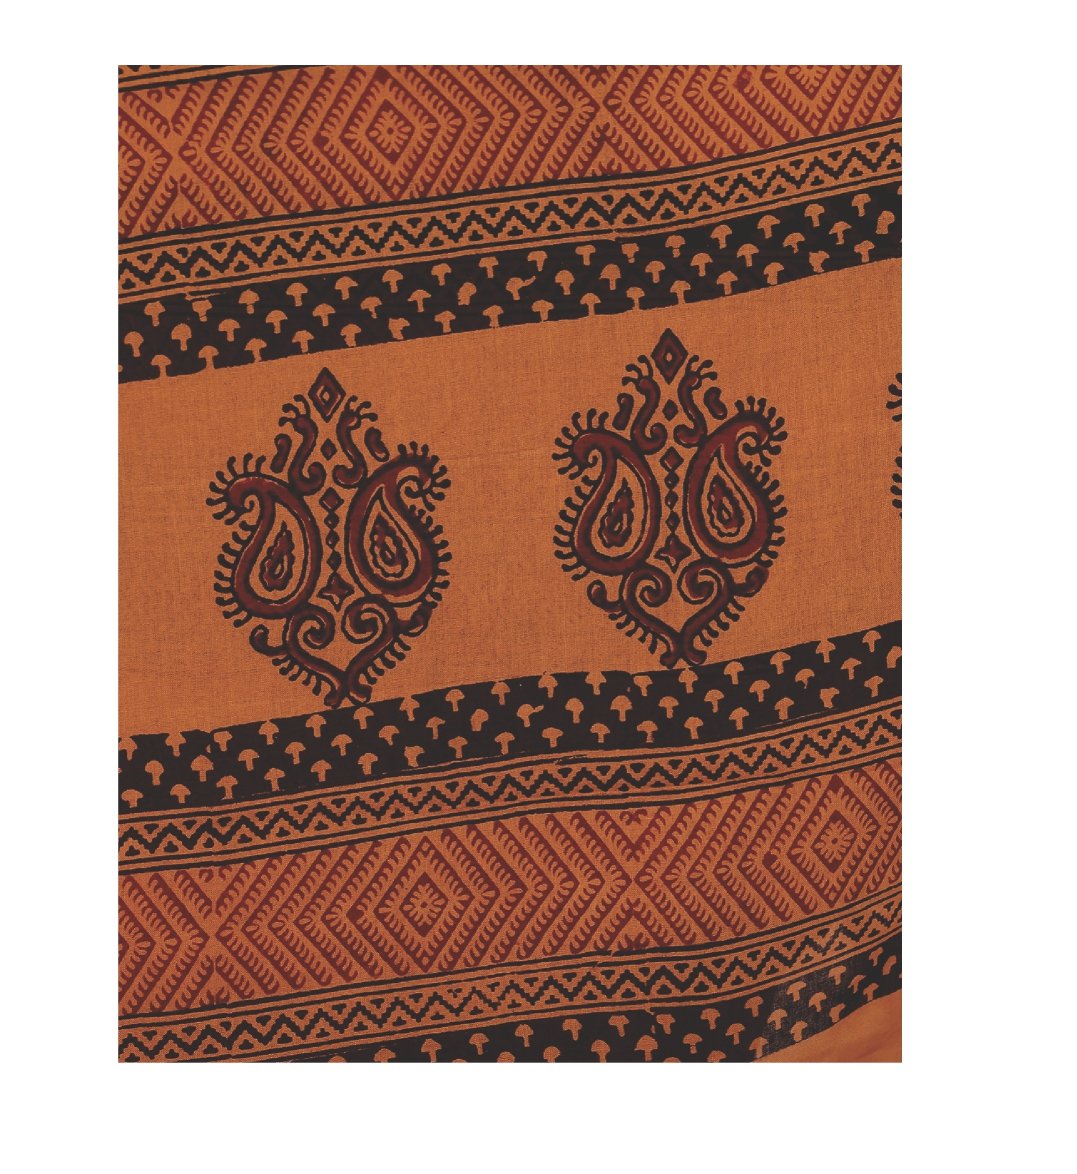 Orange Cotton Handblock Bagh Print Handcrafted Saree-Saree-Kalakari India-ZIBASA0028-Bagh, Cotton, Geographical Indication, Hand Blocks, Hand Crafted, Heritage Prints, Natural Dyes, Sarees, Sustainable Fabrics-[Linen,Ethnic,wear,Fashionista,Handloom,Handicraft,Indigo,blockprint,block,print,Cotton,Chanderi,Blue, latest,classy,party,bollywood,trendy,summer,style,traditional,formal,elegant,unique,style,hand,block,print, dabu,booti,gift,present,glamorous,affordable,collectible,Sari,Saree,printed, ho